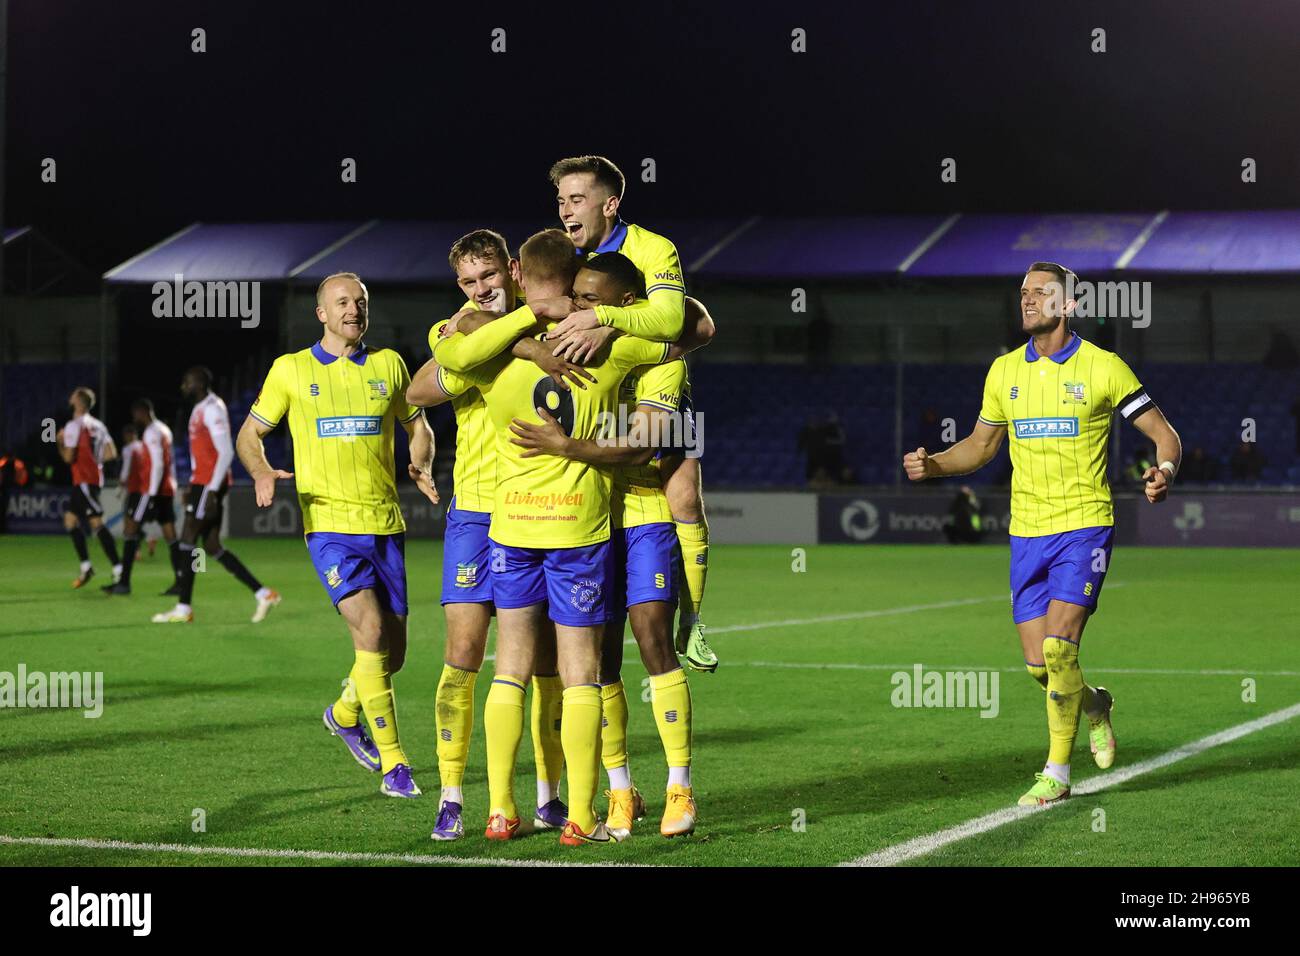 SOLIHULL, ENGLAND. DECEMBER 4TH 2021. Adam Rooney of Solihull Moors (9) celebrates with teammates after scoring his sides second goal during the Vanarama National League match between Solihull Moors and Woking FC at the Armco Stadium, Solihull on Saturday 4th December 2021. (Credit: James Holyoak/Alamy Live News) Stock Photo